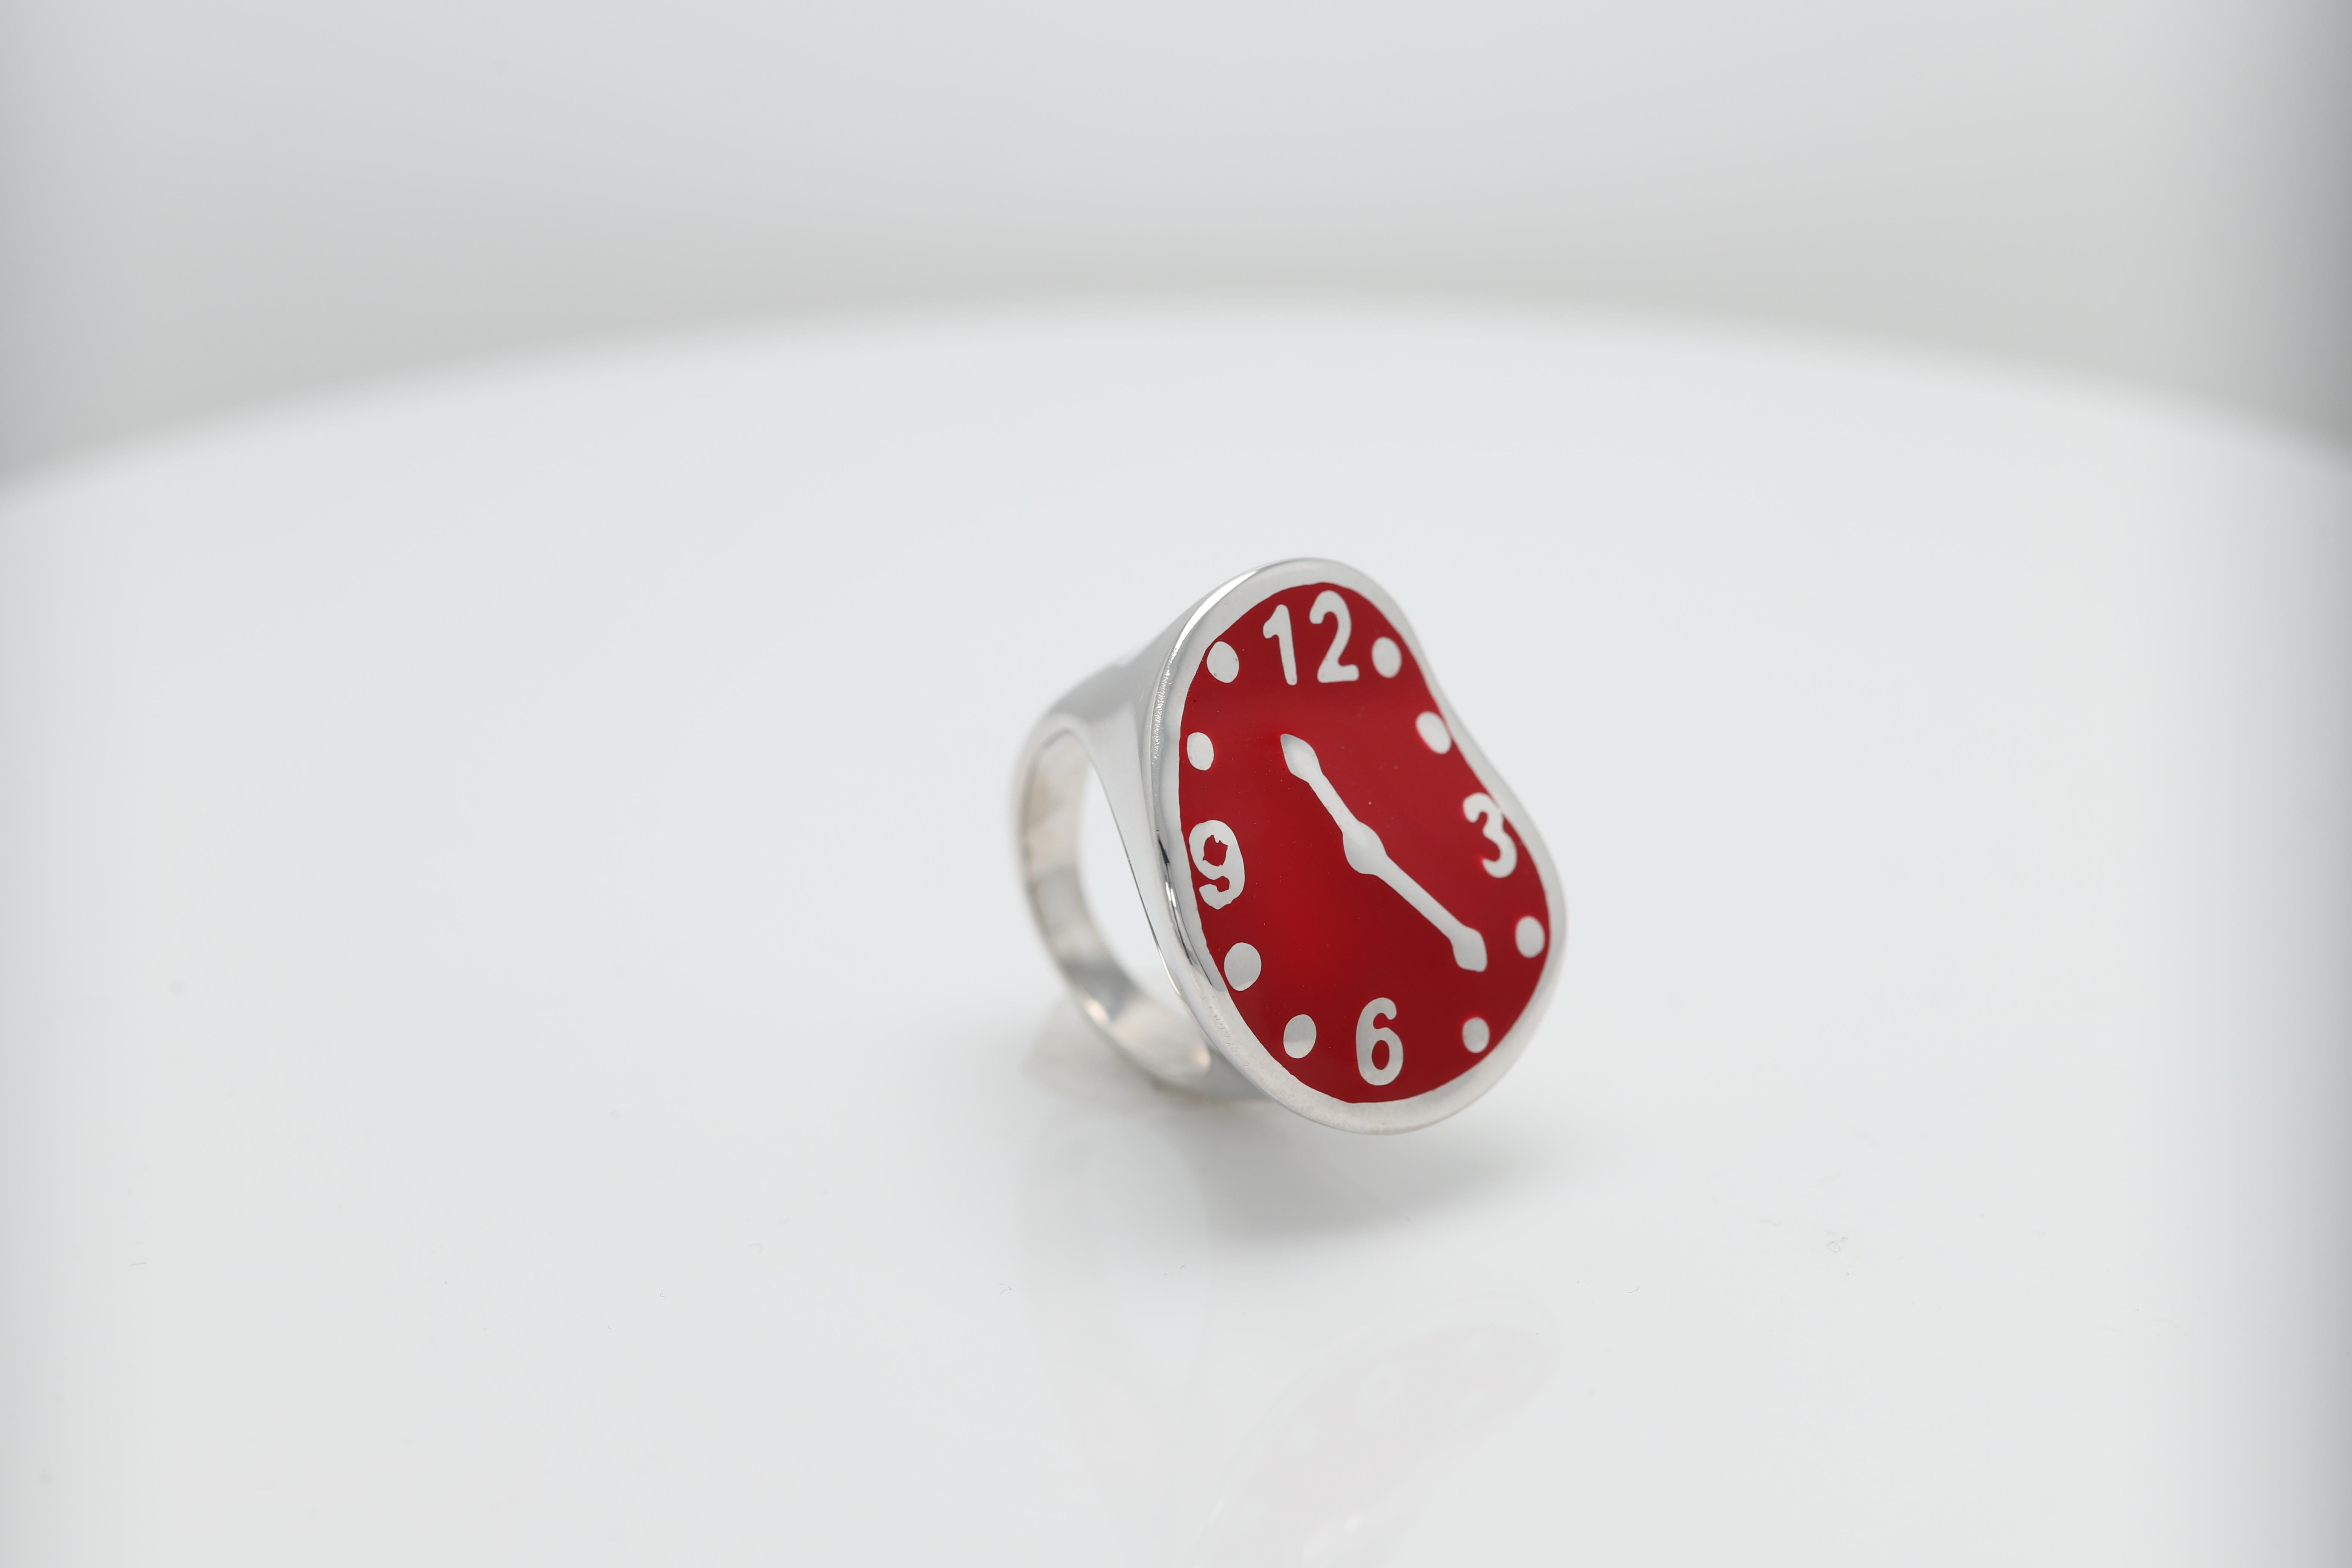 Enamel Artistic Art Ring Inspired by famous world artist sterling silver 925 hand made in Italy finger size 7.5  (NOT RESIZABLE) please inquire about other sizes. Approx design area size:  27 X 20 MM  ( 1'  INCH LONG ) Slightly imperfections may